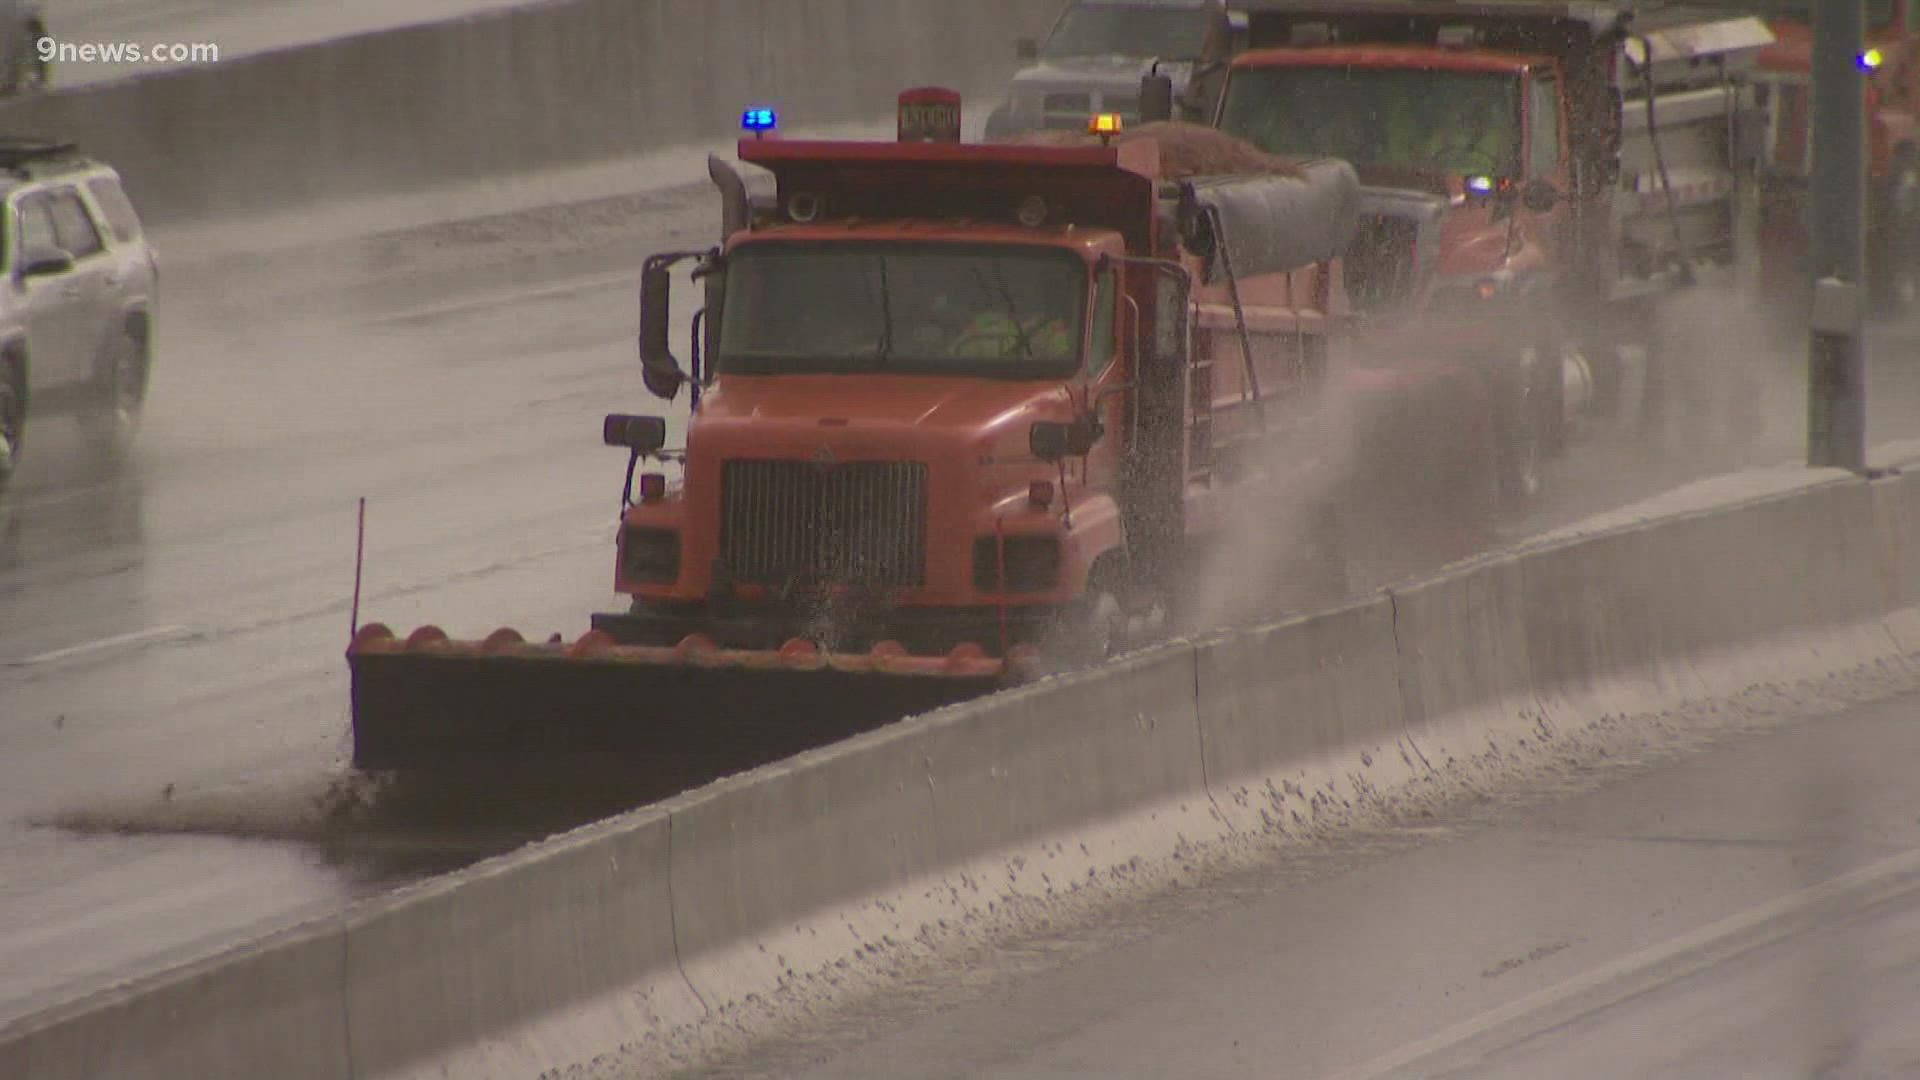 CDOT told 9NEWS they had more than 100 plows on the roads during Tuesday's snowstorm, even while they are short-staffed.